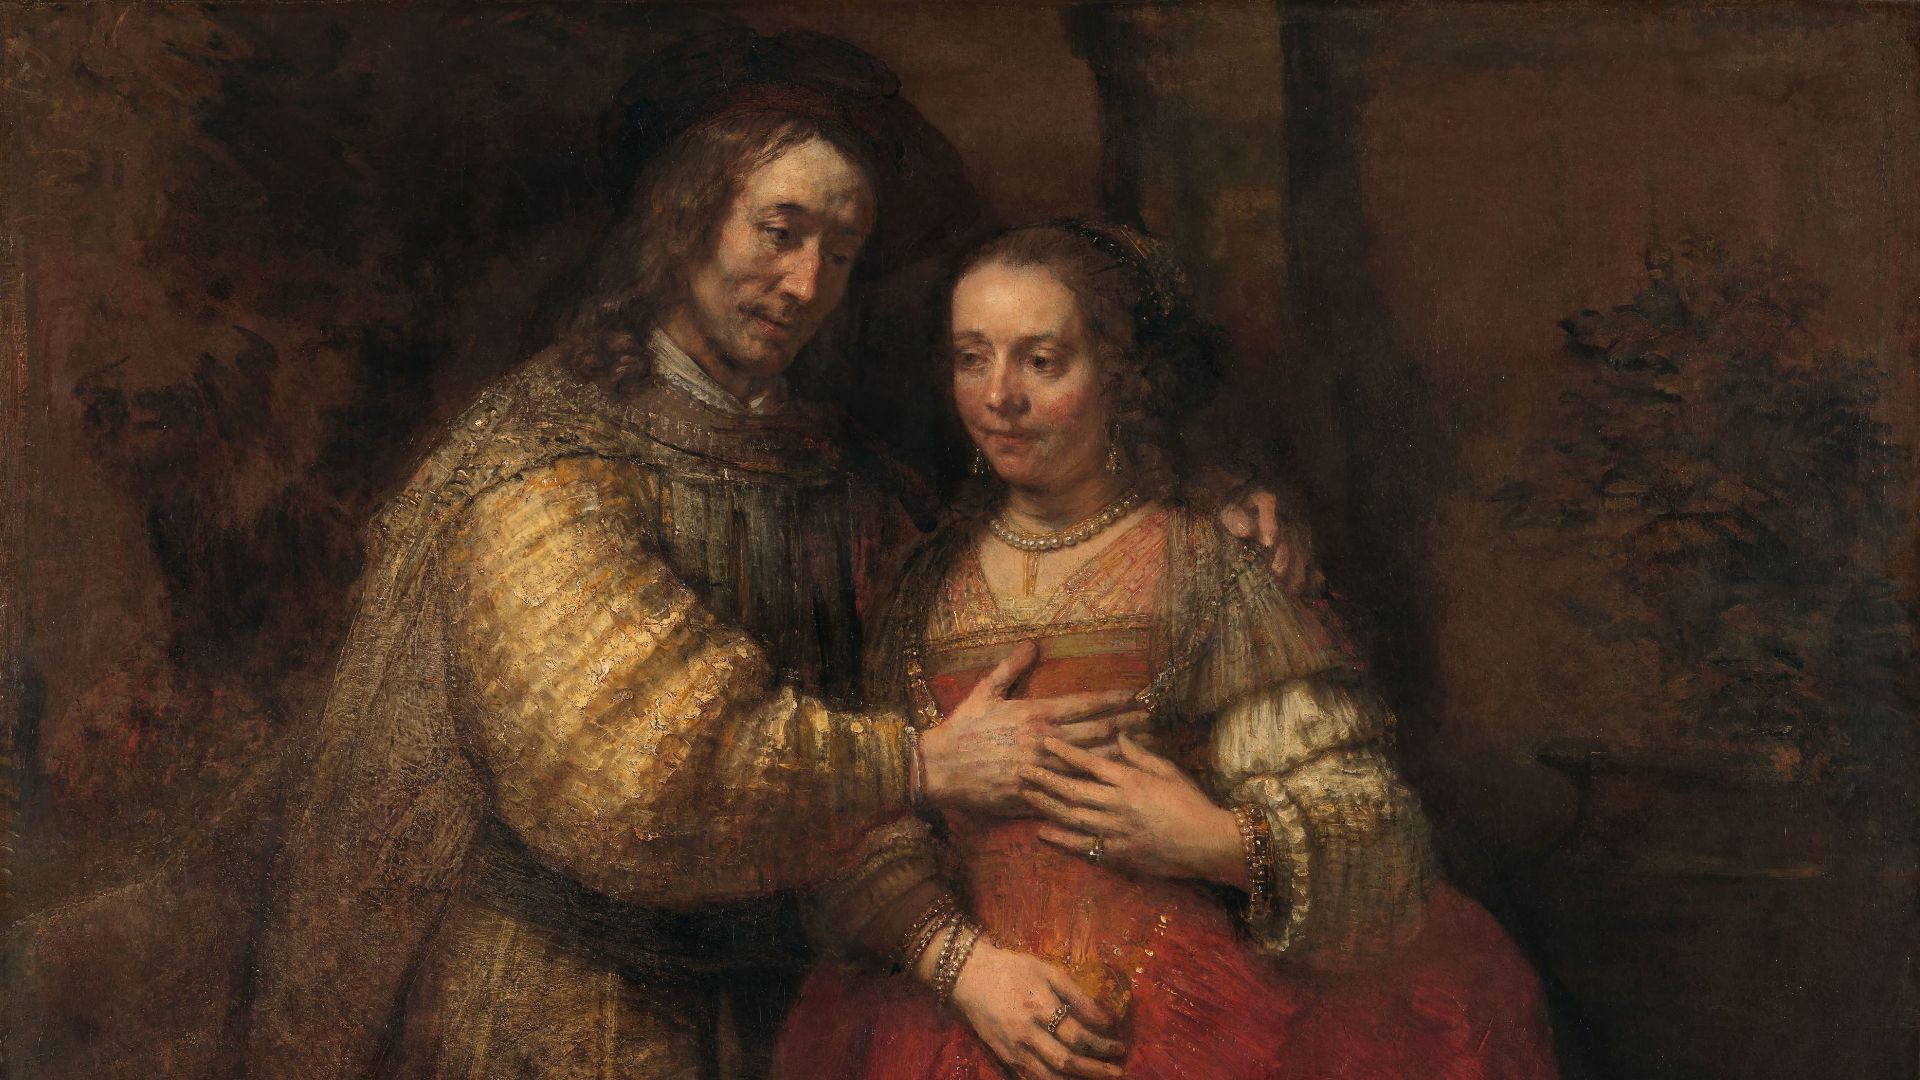 Isaac and Rebecca, Known as ‘The Jewish Bride’